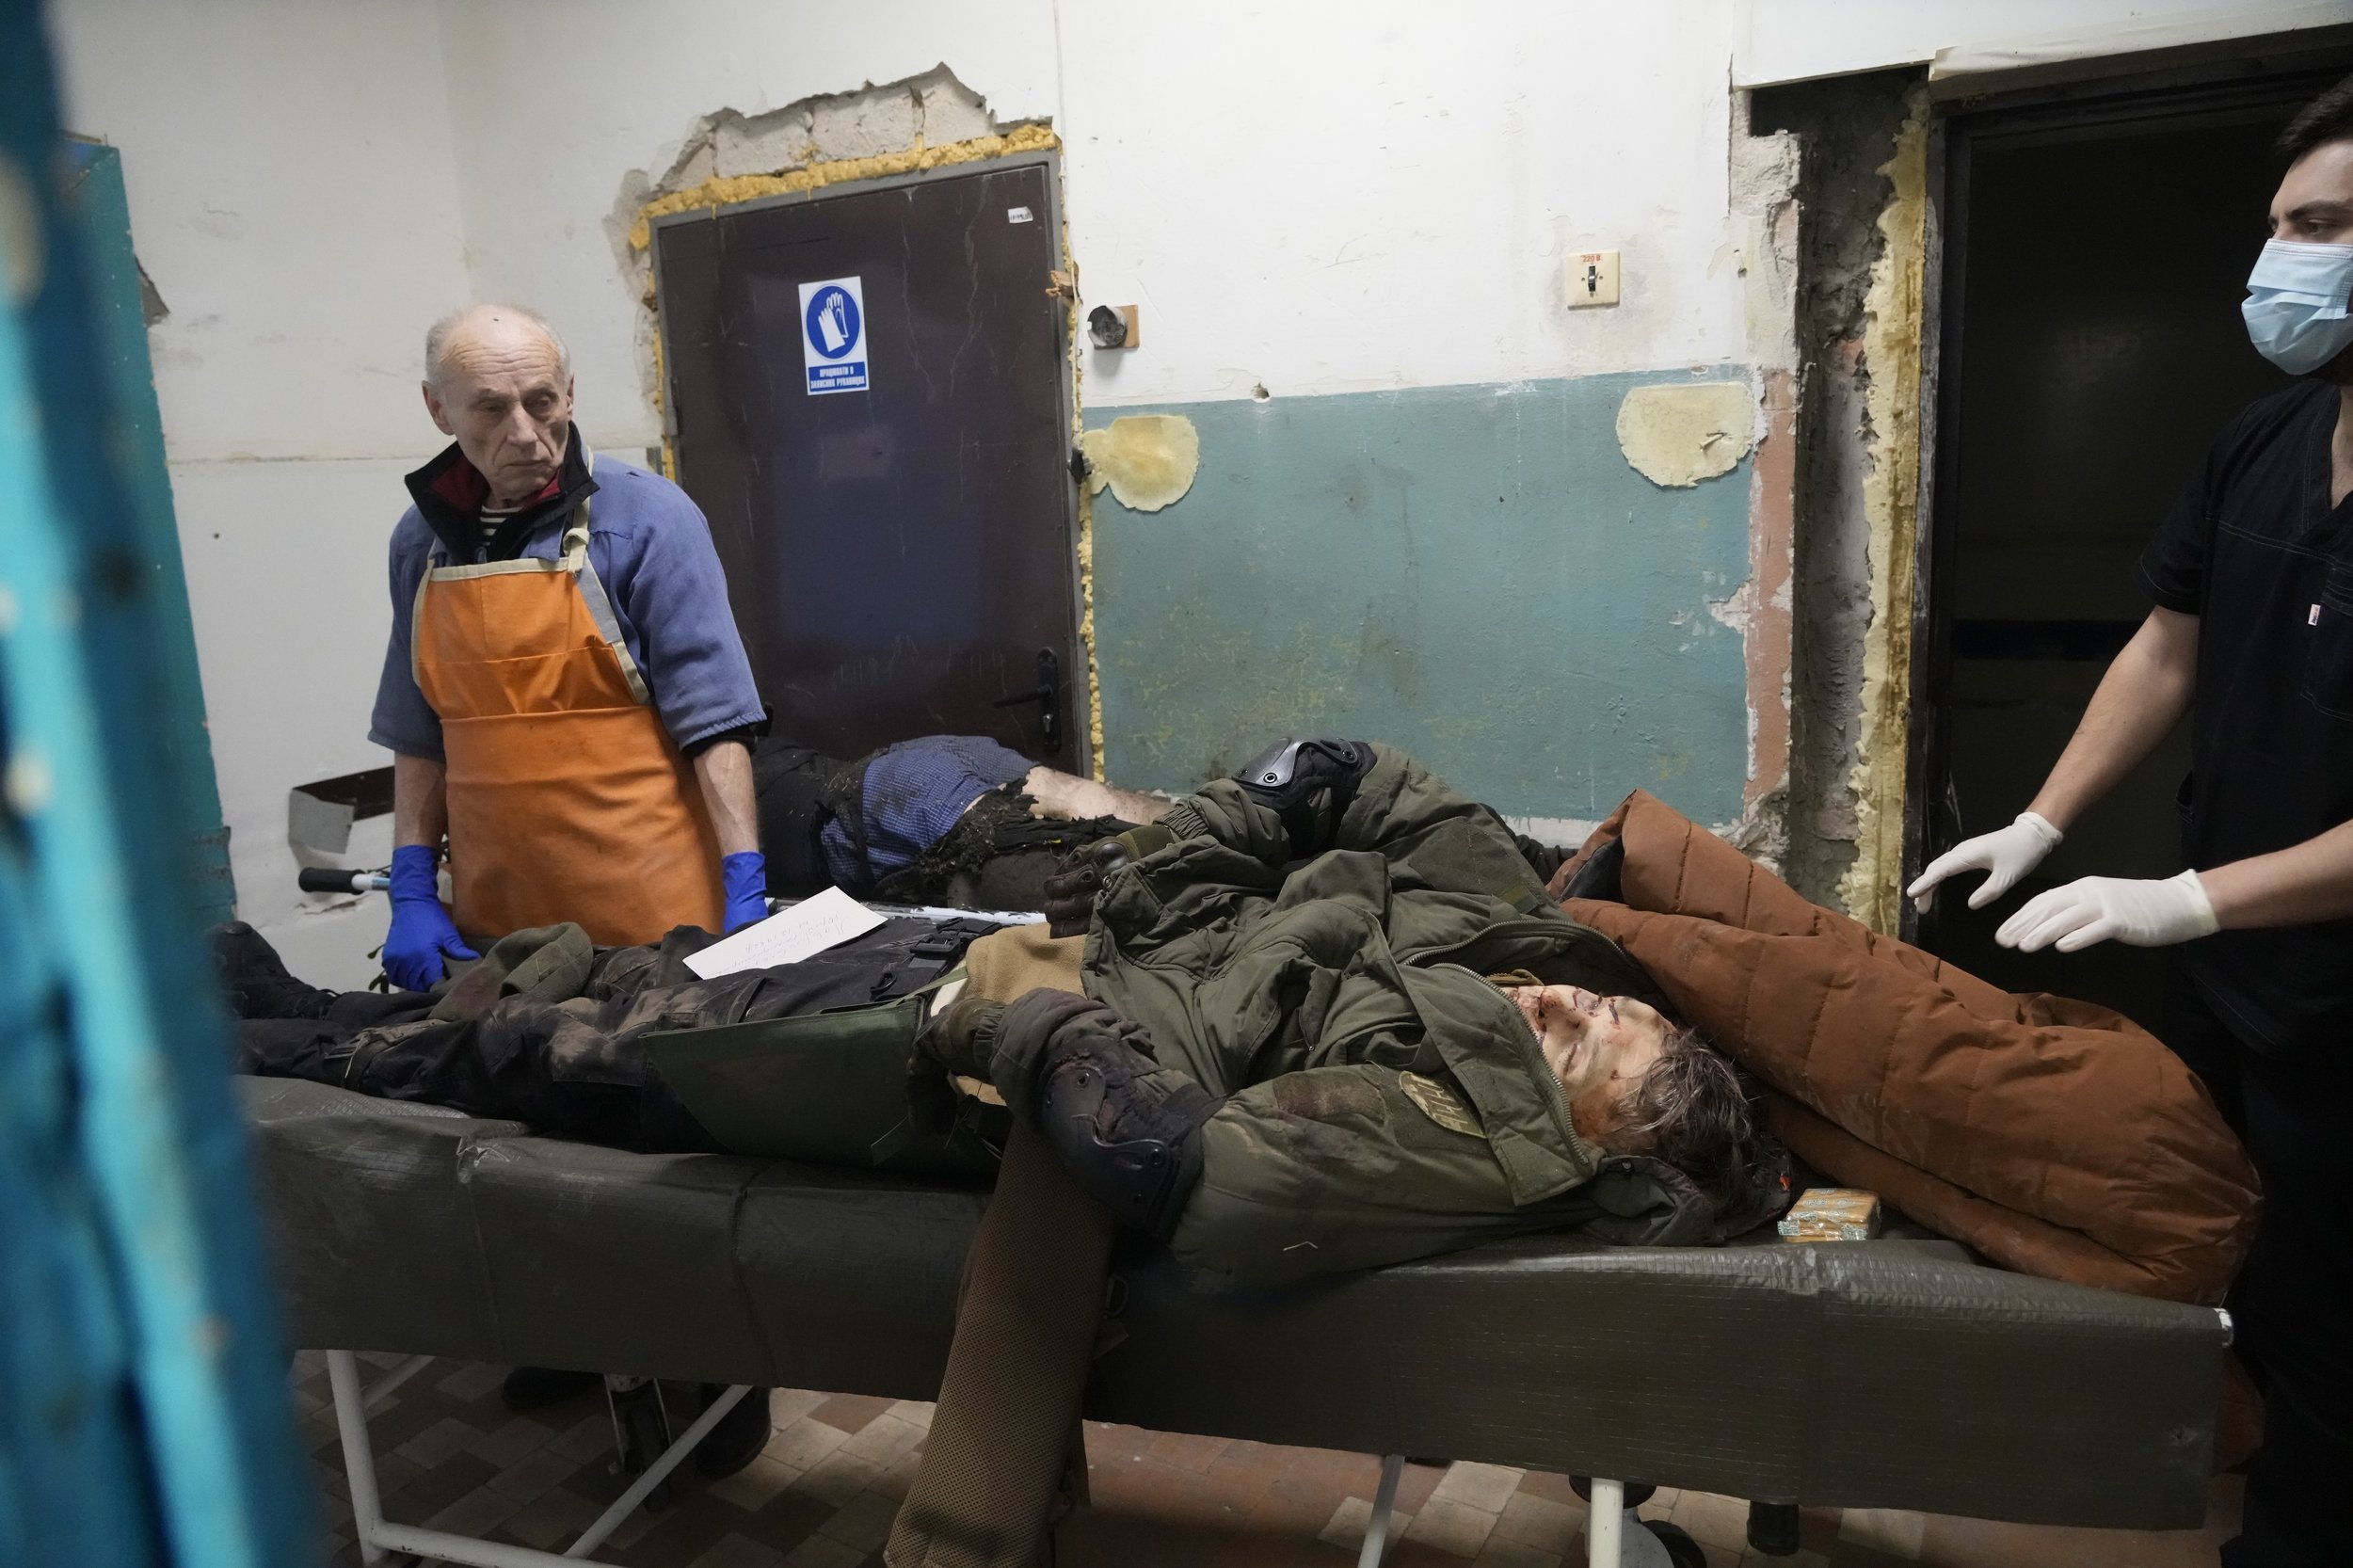  EDS NOTE: GRAPHIC CONTENT - Morgue workers look at the body of a killed volunteer of Ukraine's Territorial Defense Forces at a hospital in Brovary, outside Kyiv, Ukraine, Tuesday, March 1, 2022. (AP Photo/Efrem Lukatsky) 